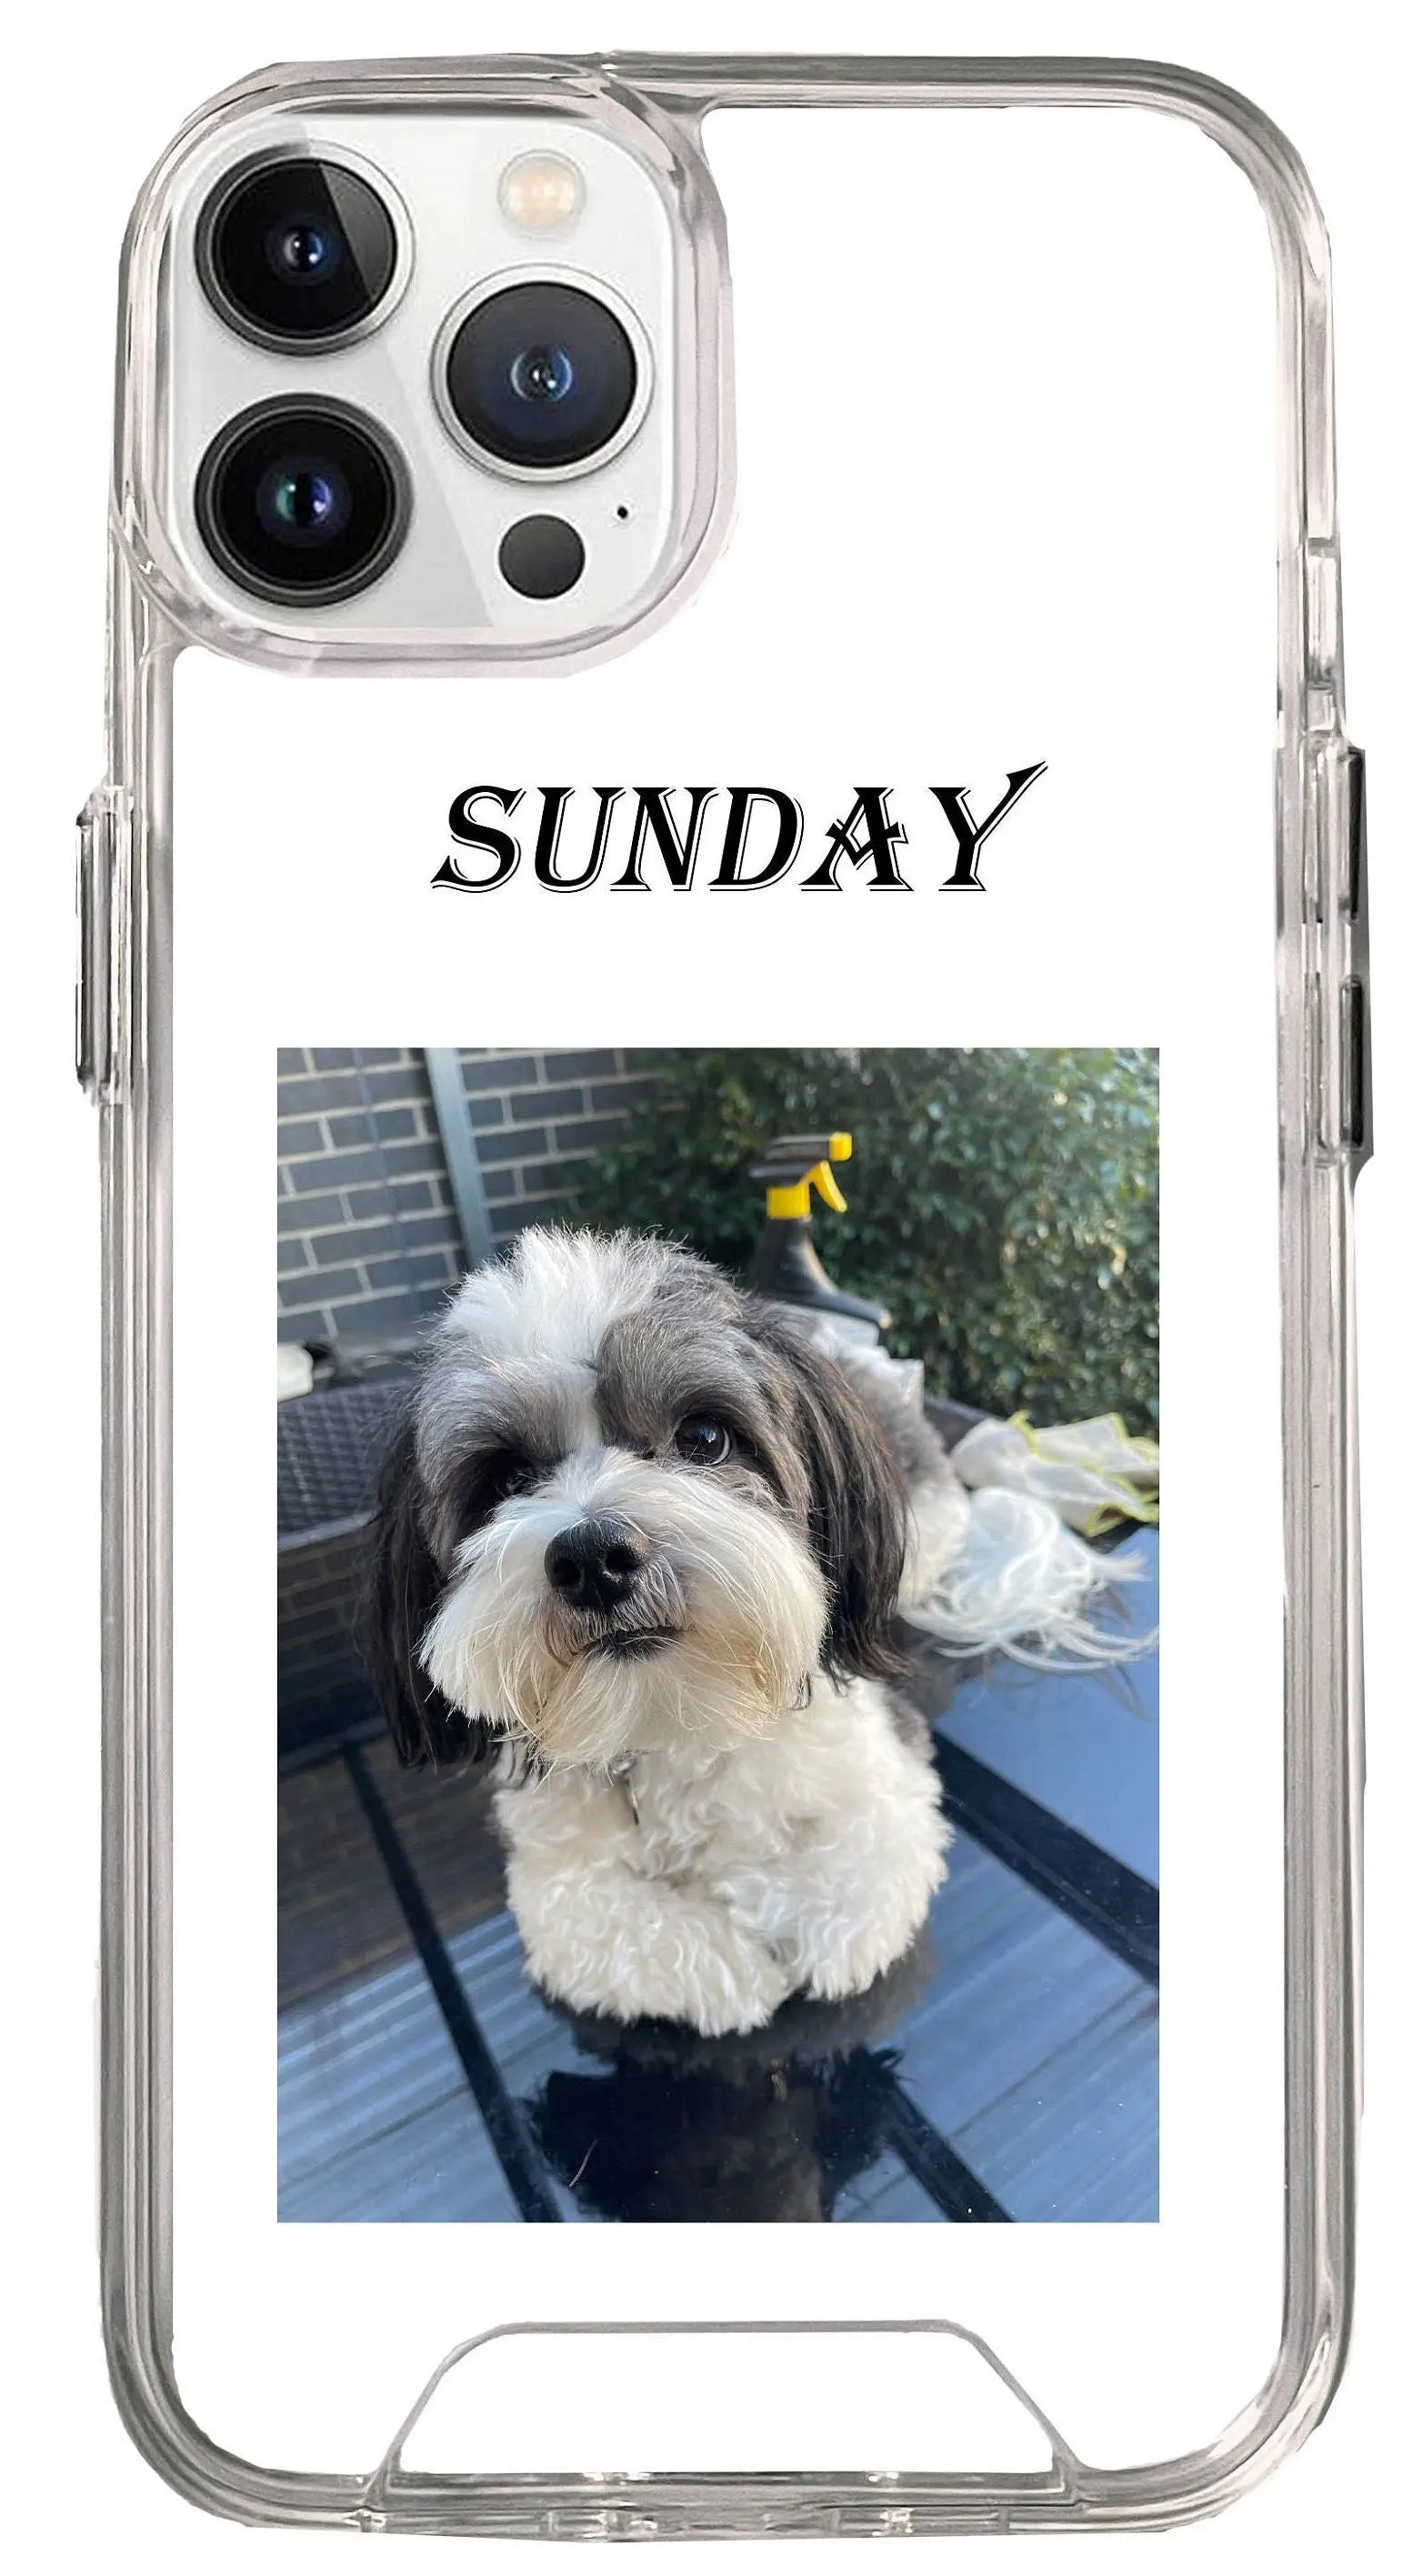 iPhone Case All Models |Samsung S10- NOTE 20U | Personalized Phone Case Photo+words - Sunday's Creative